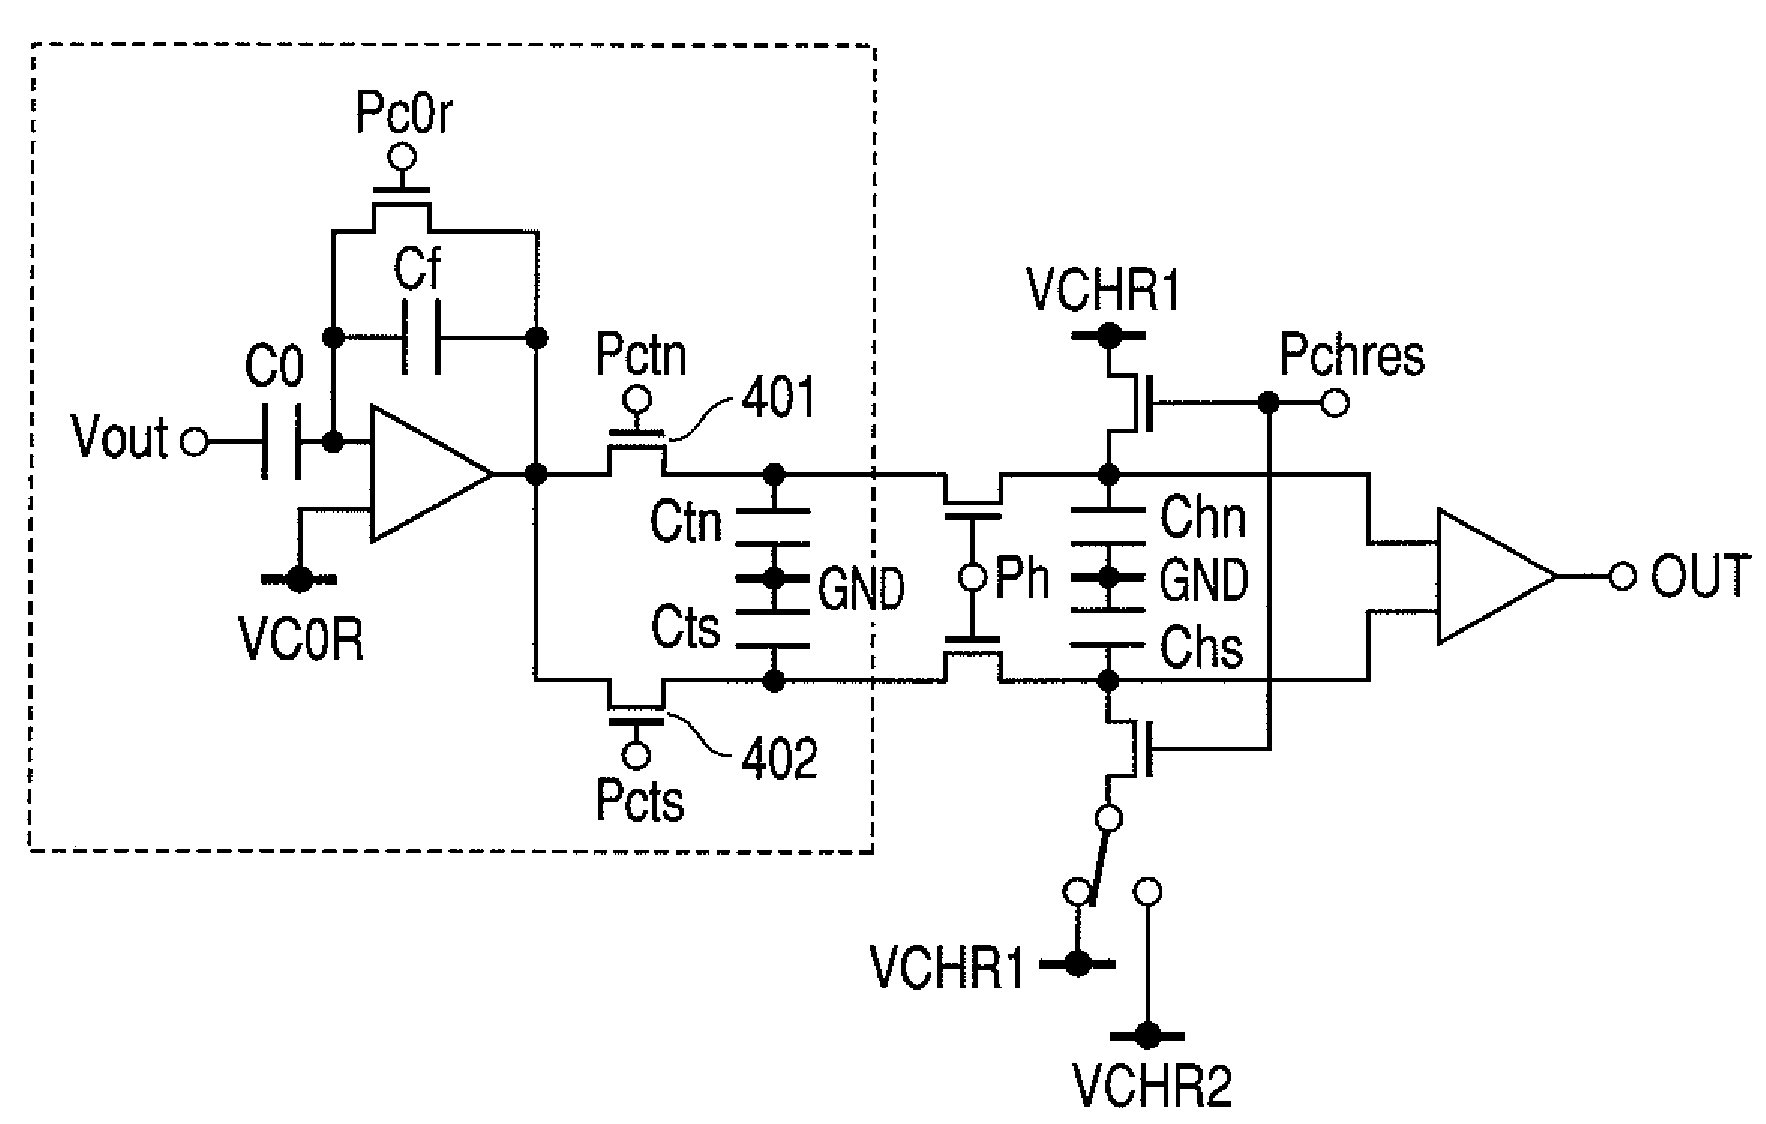 Solid-state image pickup apparatus